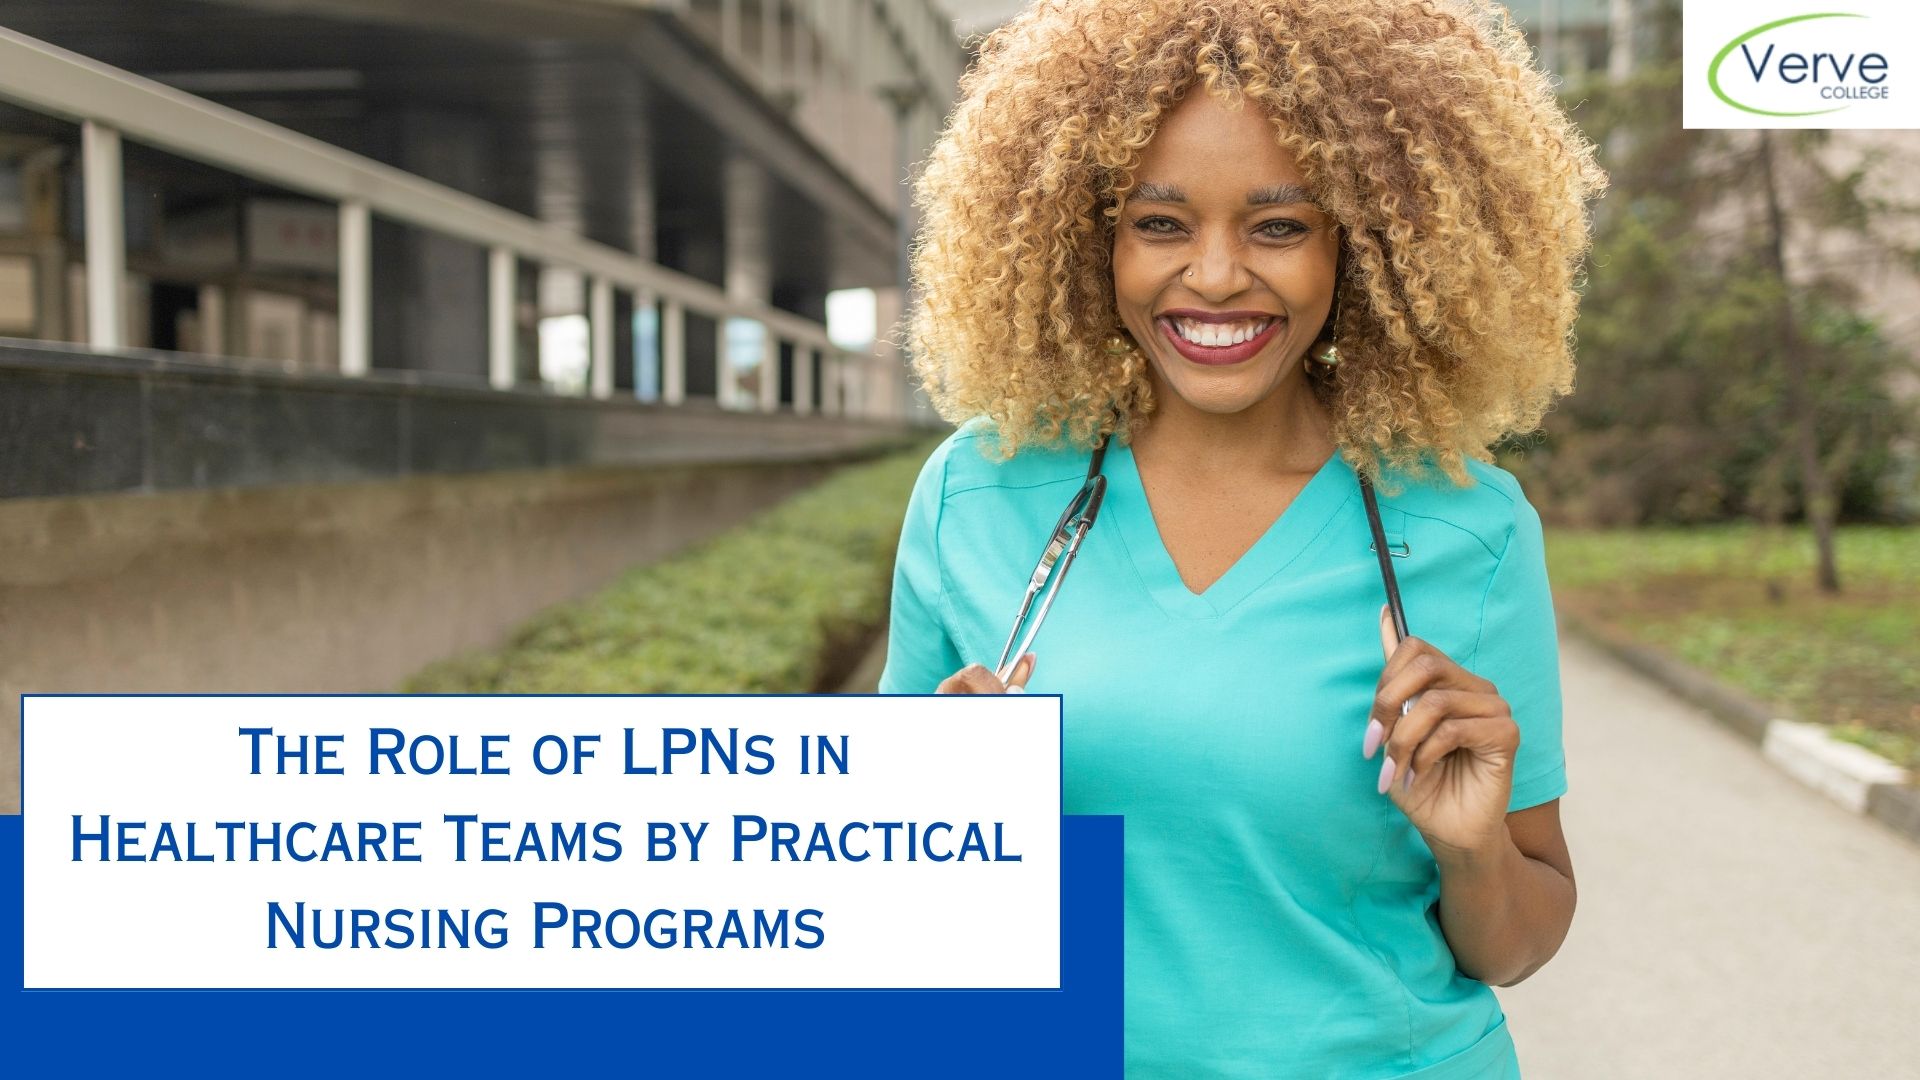 The Role of LPNs in Healthcare Teams by Practical Nursing Programs